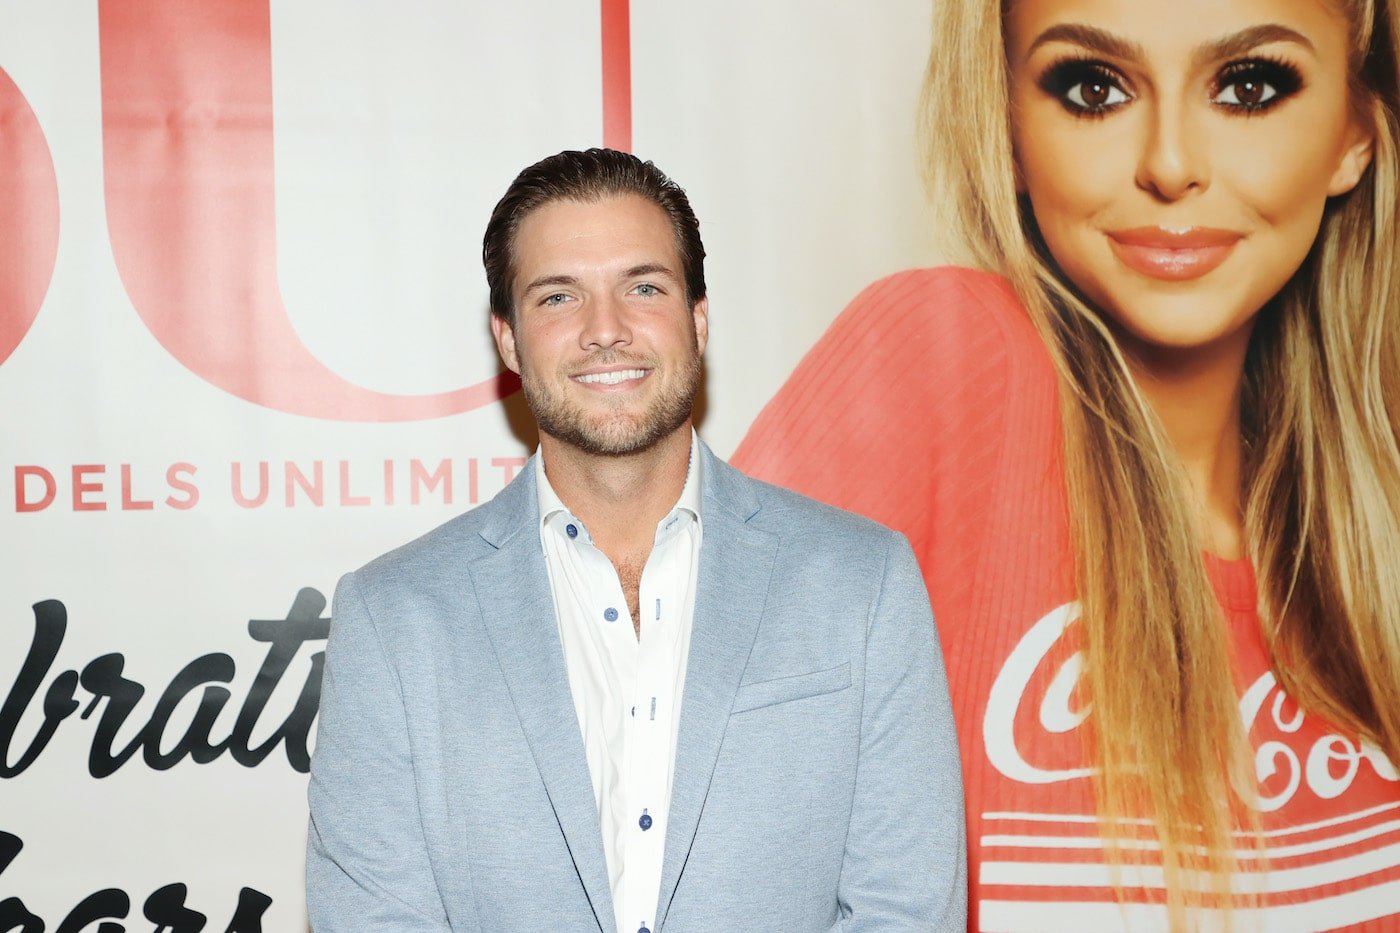 Jordan Kimball from 'Bachelor in Paradise' on the red carpet of an event